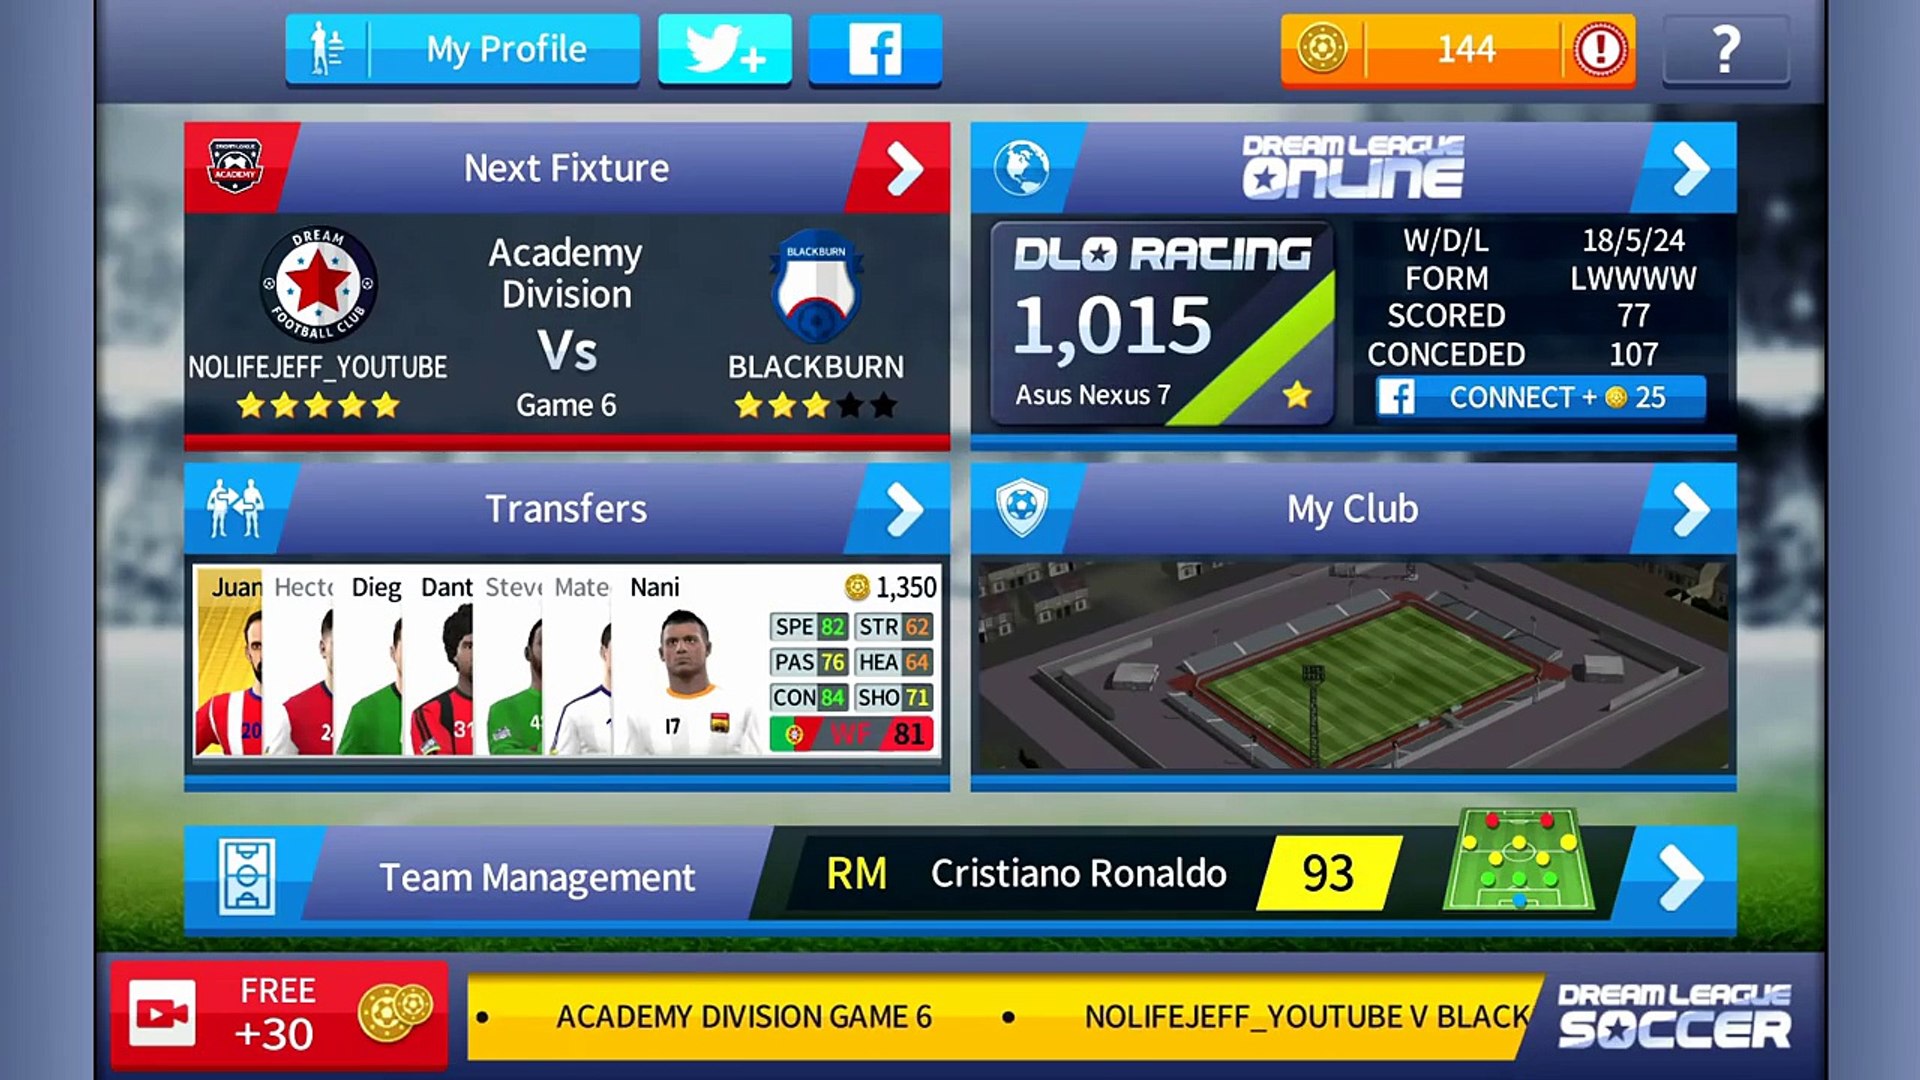 Cheat Freec.Co/Dls Online Of Dream League Soccer | New Cheat ... - 